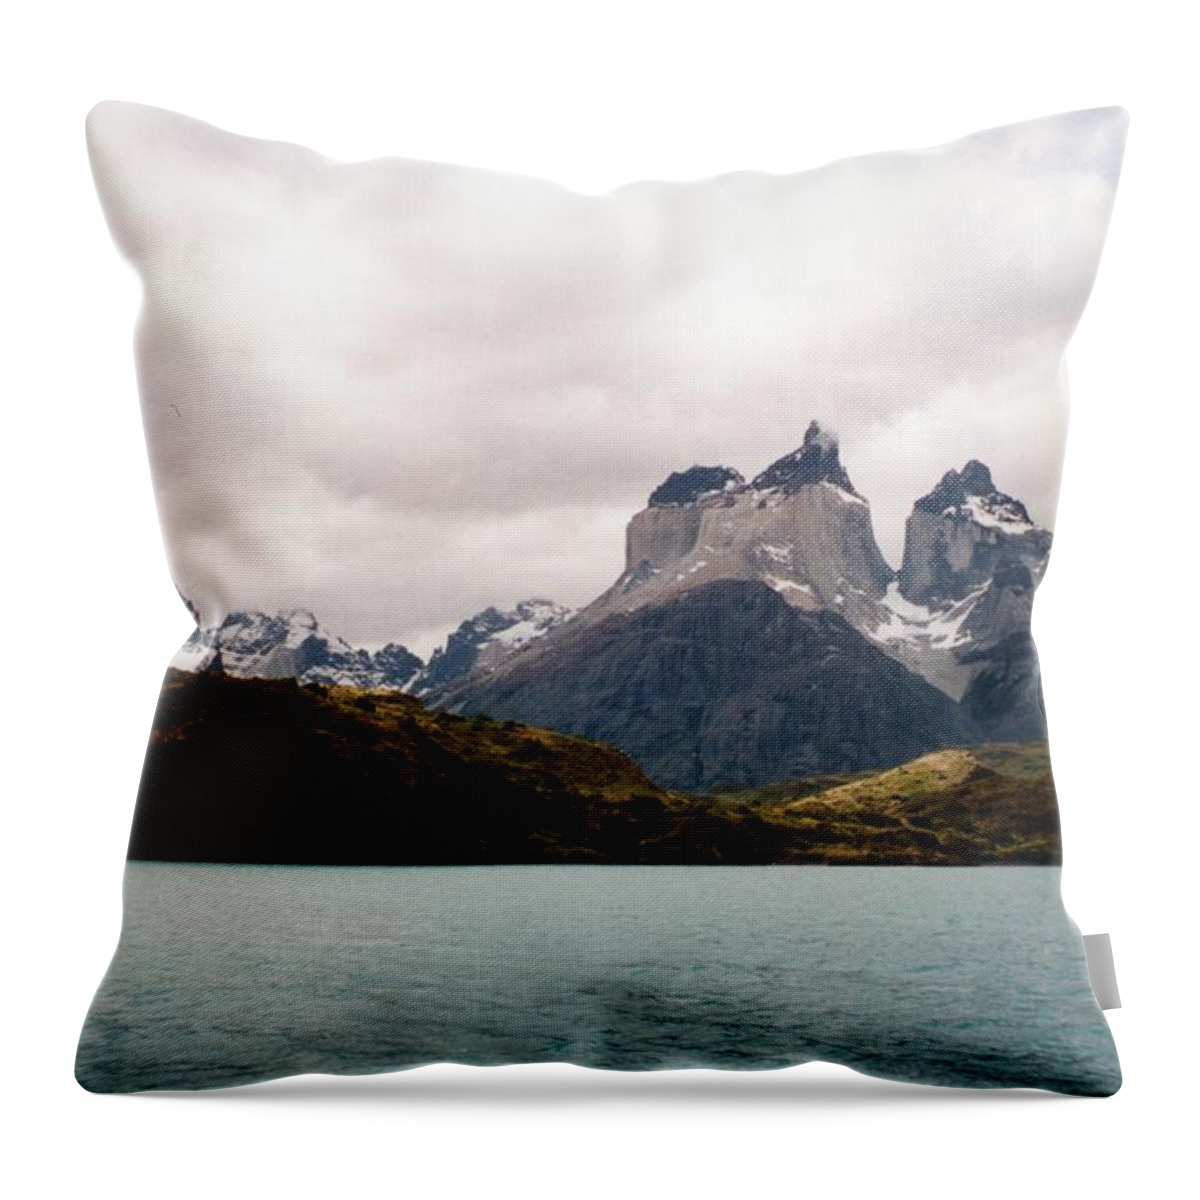 Torres Del Paine National Park Throw Pillow featuring the photograph Torres Del Paine - Chile by Ronald Osborne